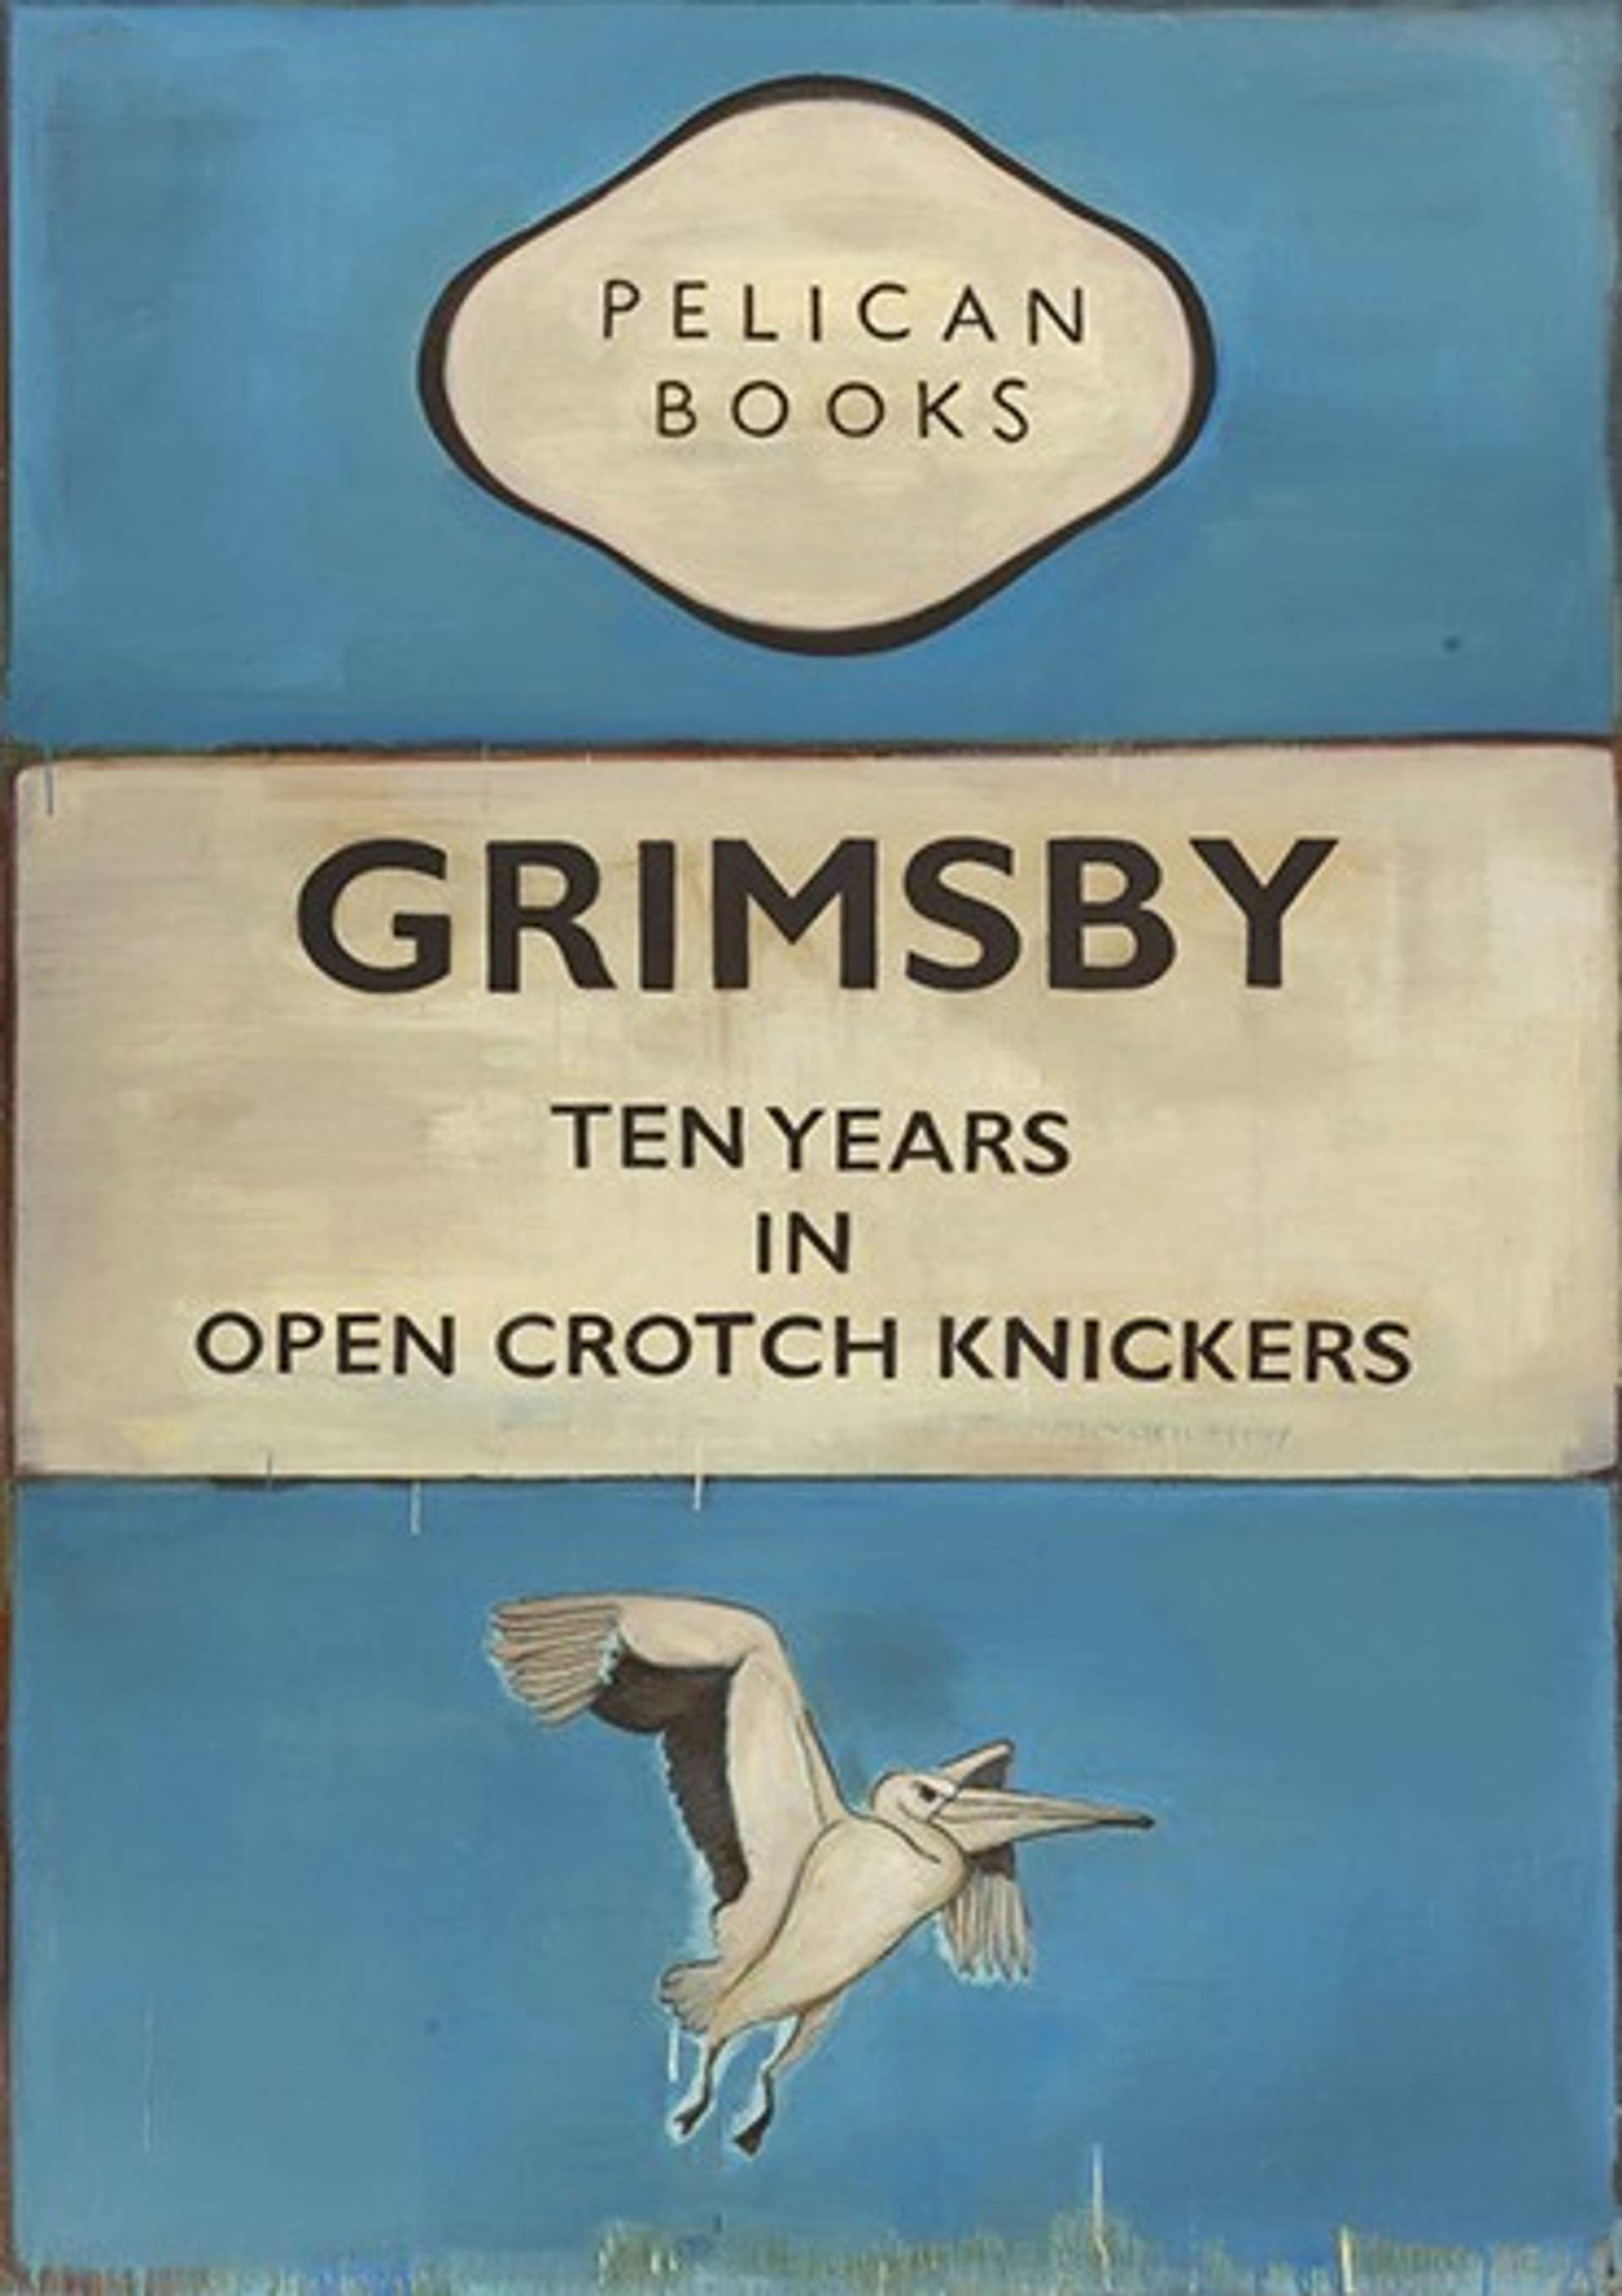 Grimsby: Ten Years in Open Crotch Knickers by Harland Miller